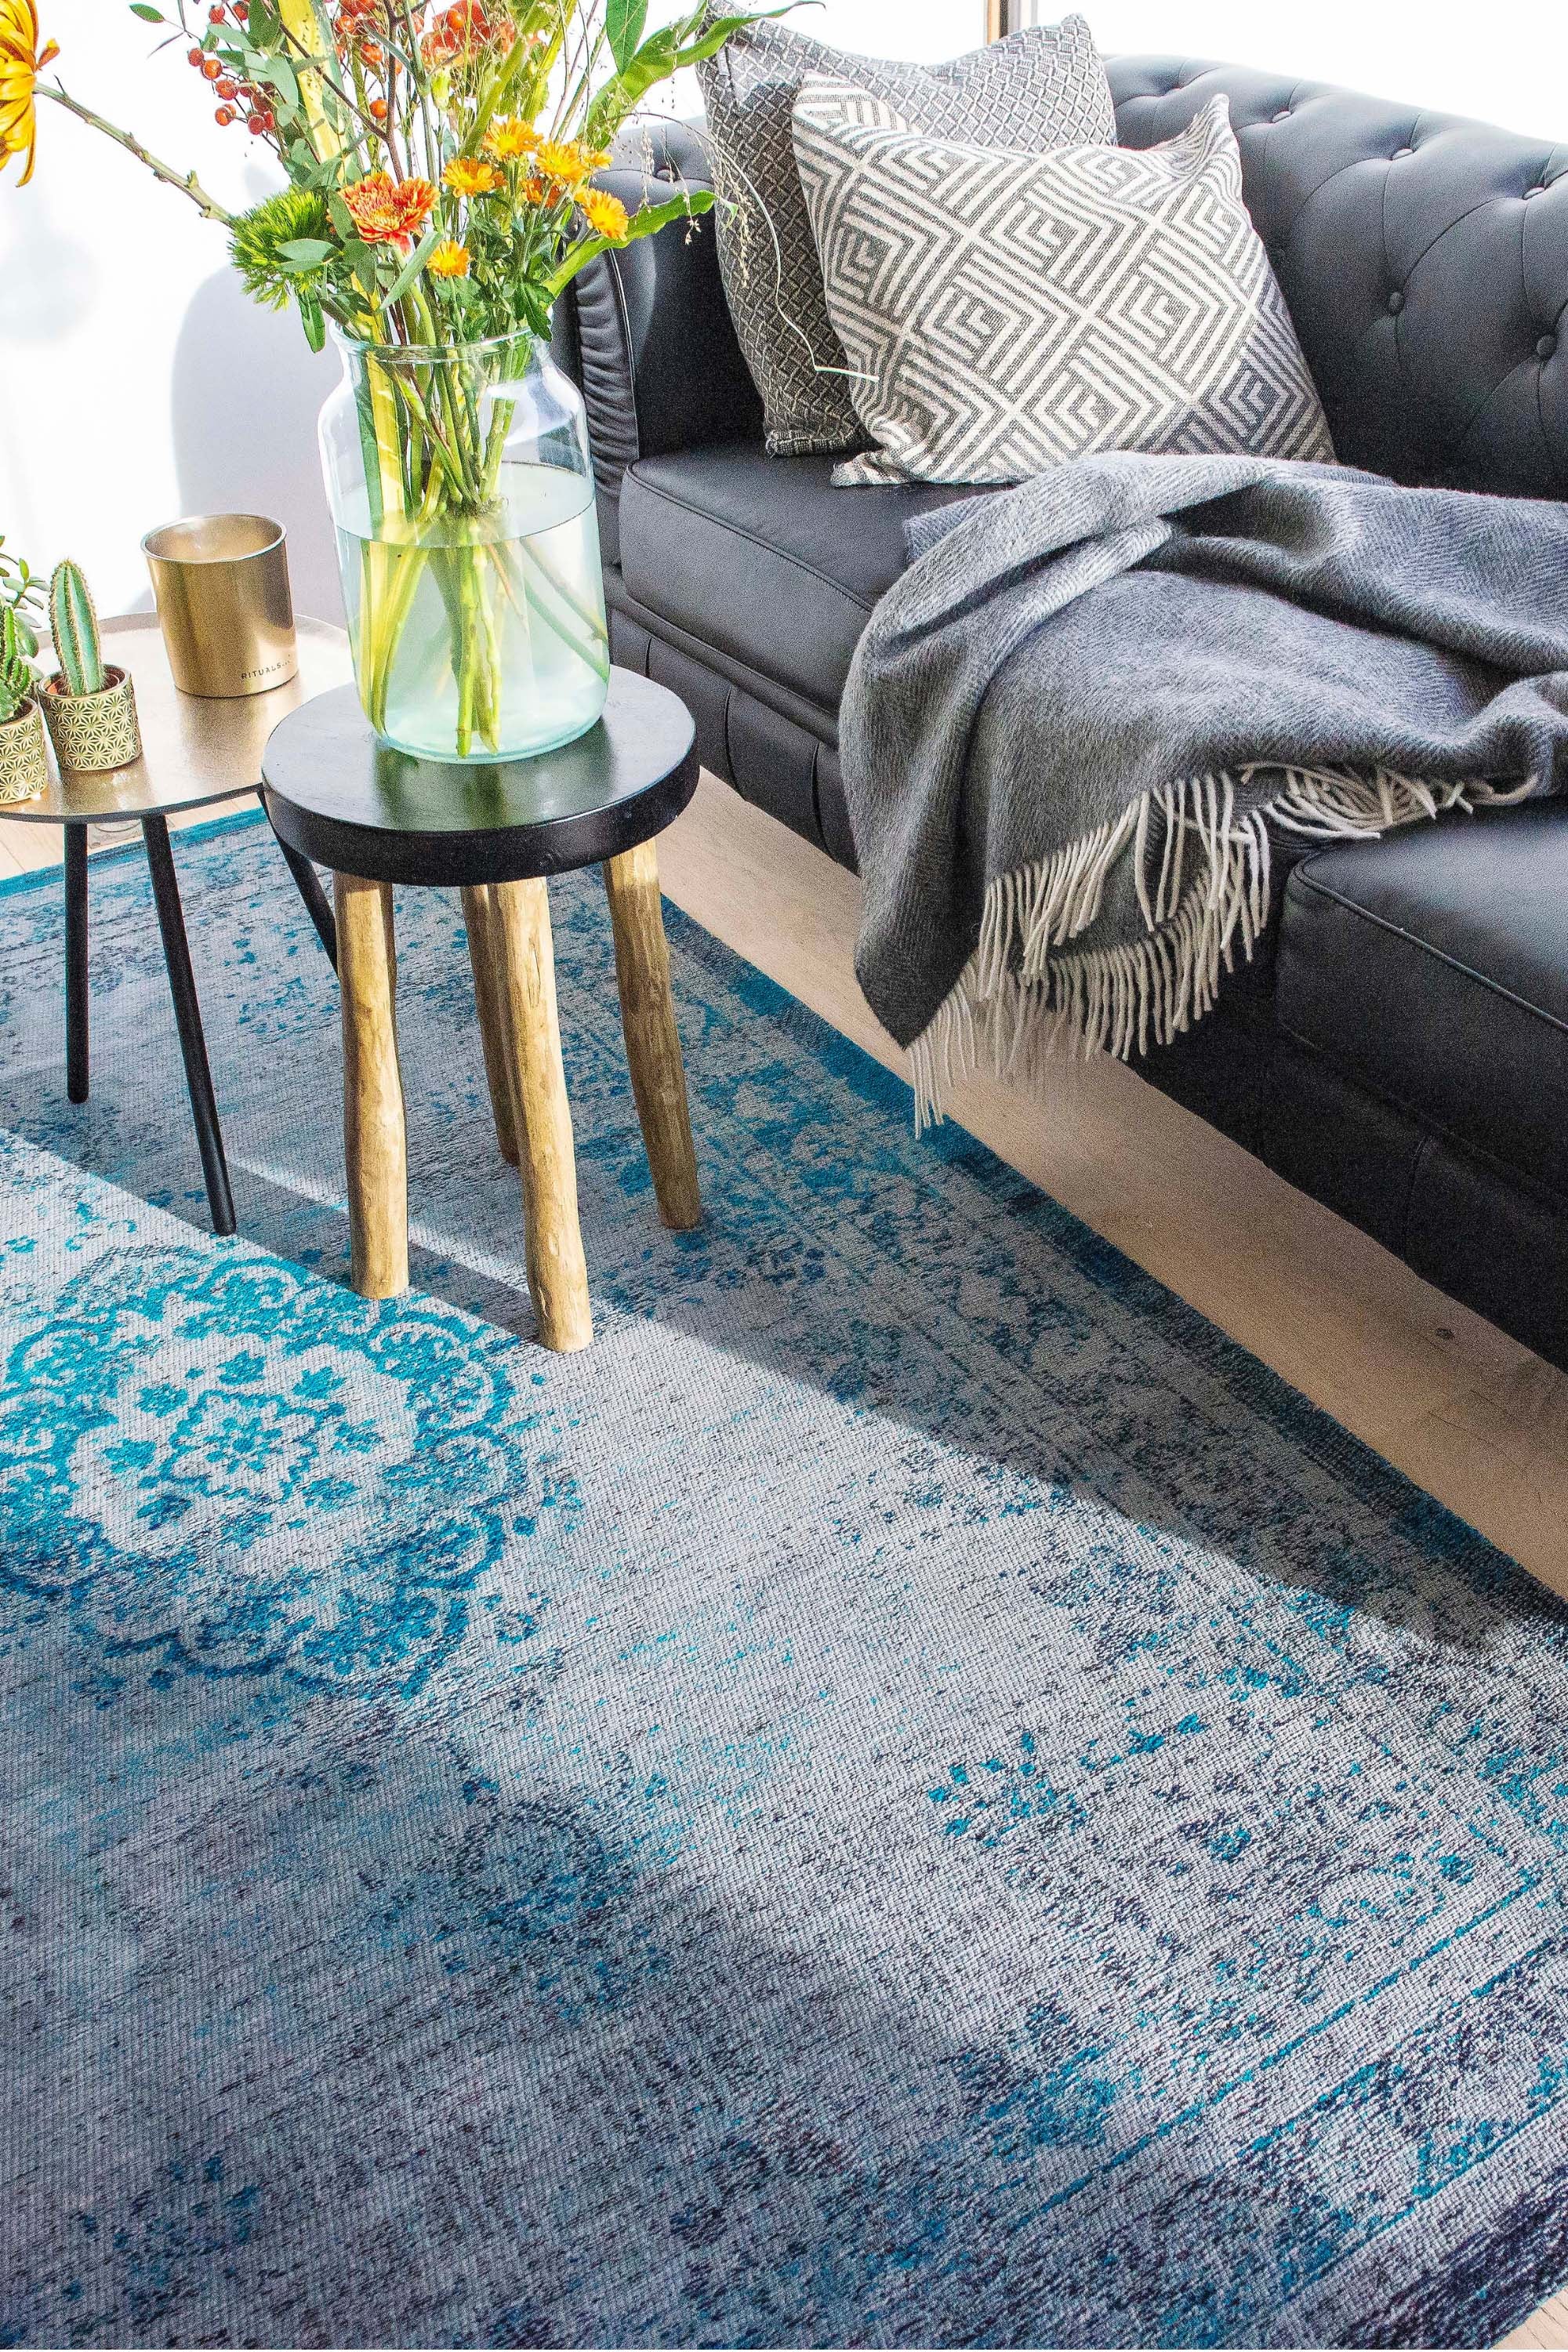 Grey and blue flatweave rug with faded persian design